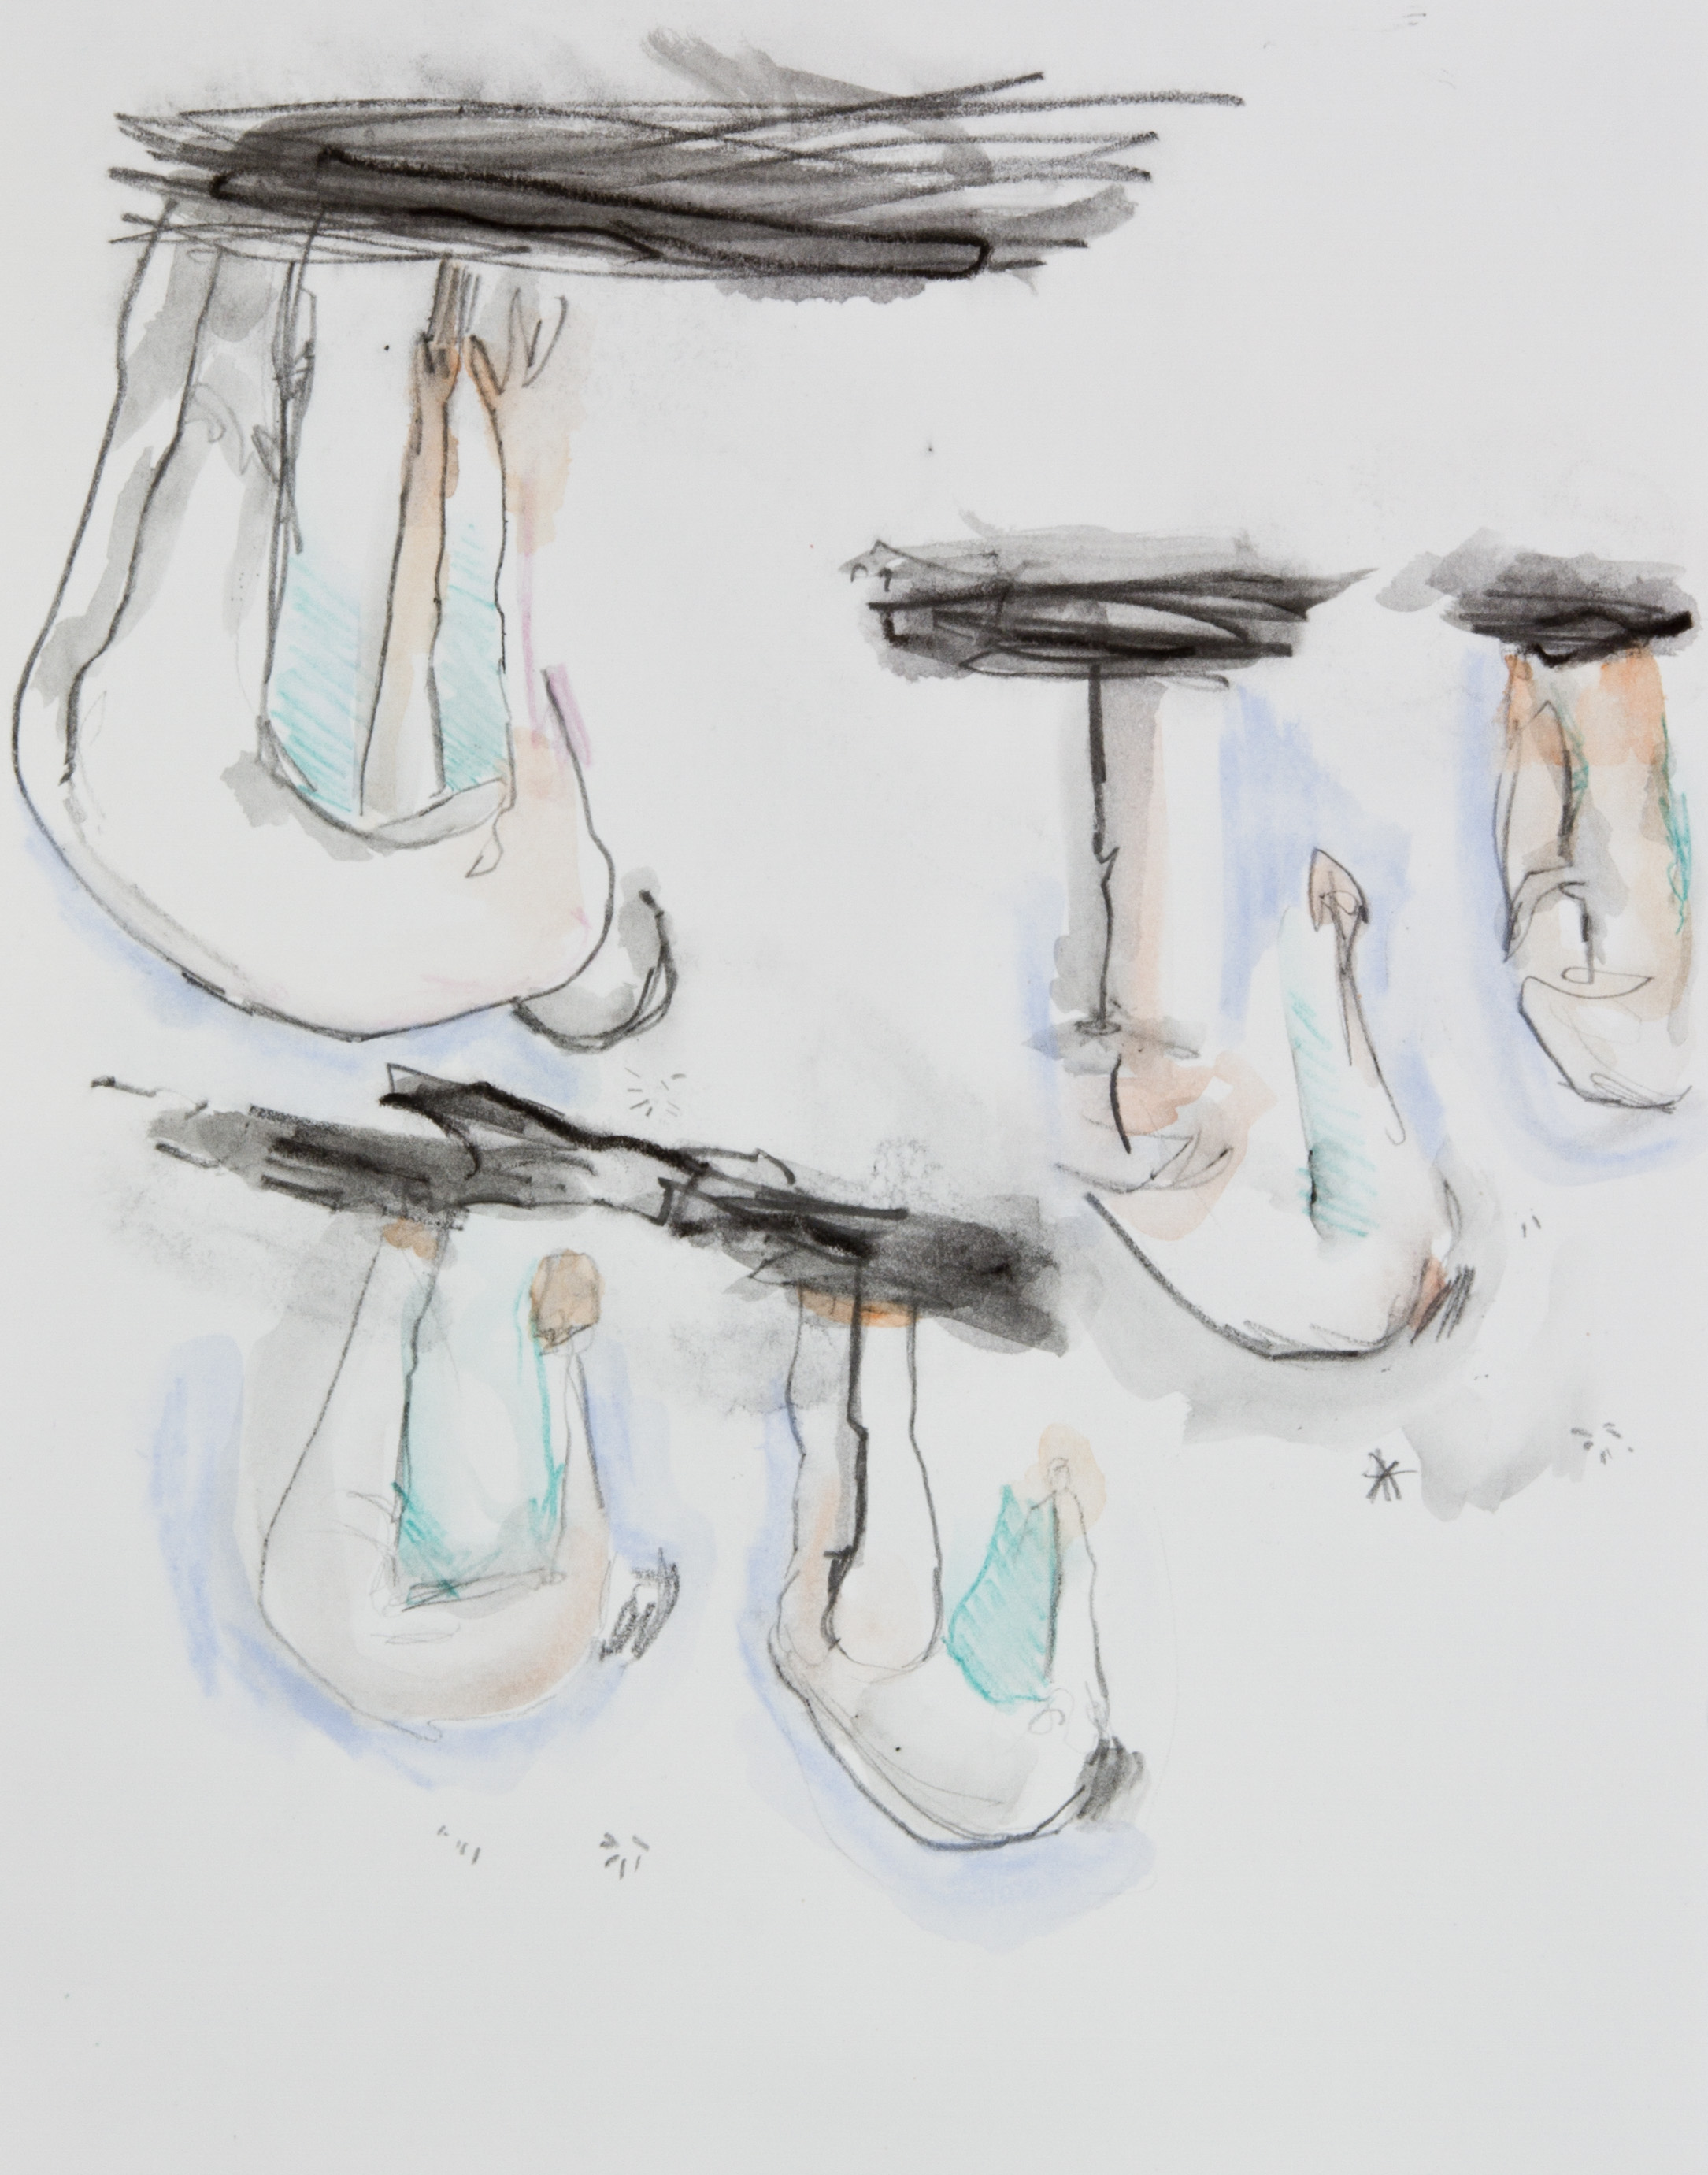 They Fell From Above, 2013, graphite, crayon and watercolor pencil on paper, 11x14 inches